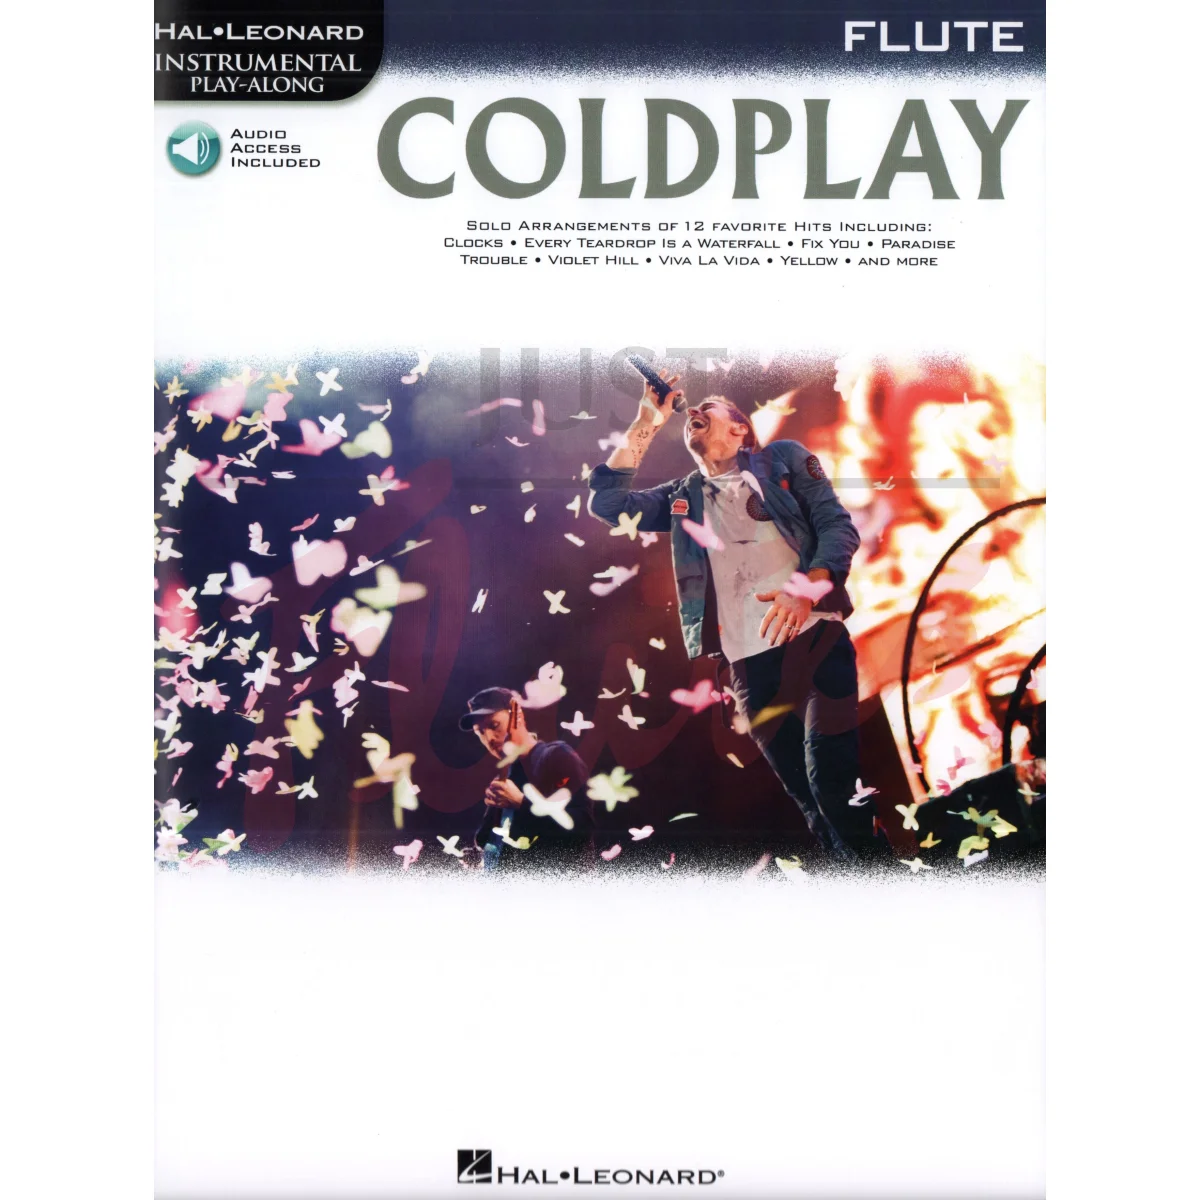 Coldplay for Flute